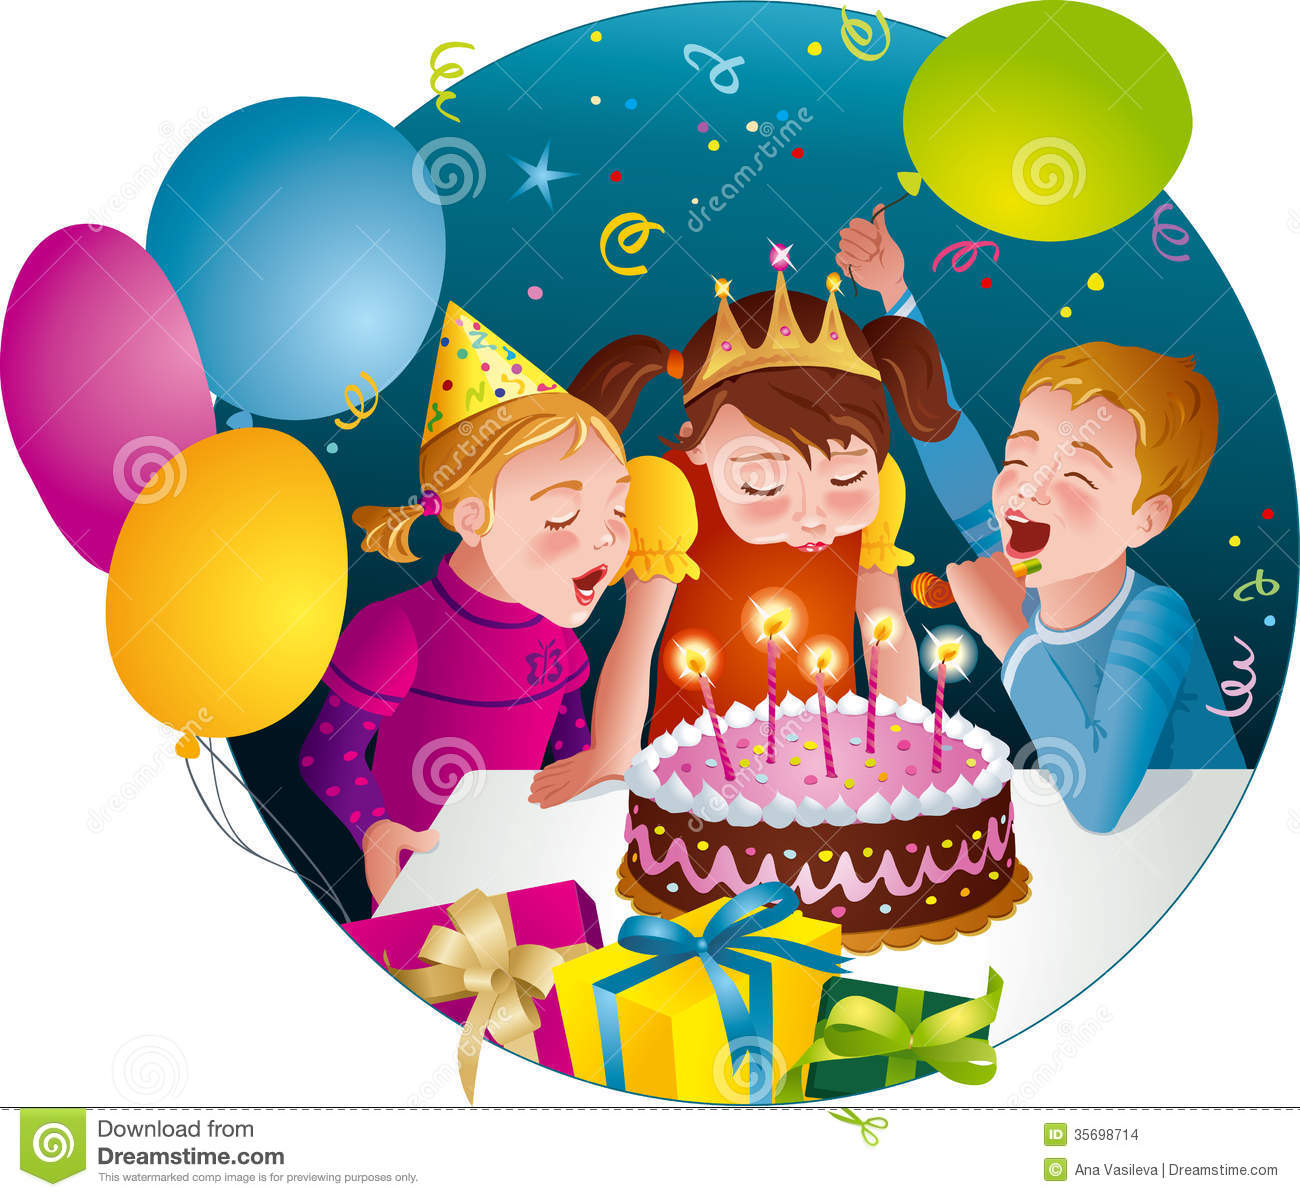 Happy birthday party clipart - ClipartFest